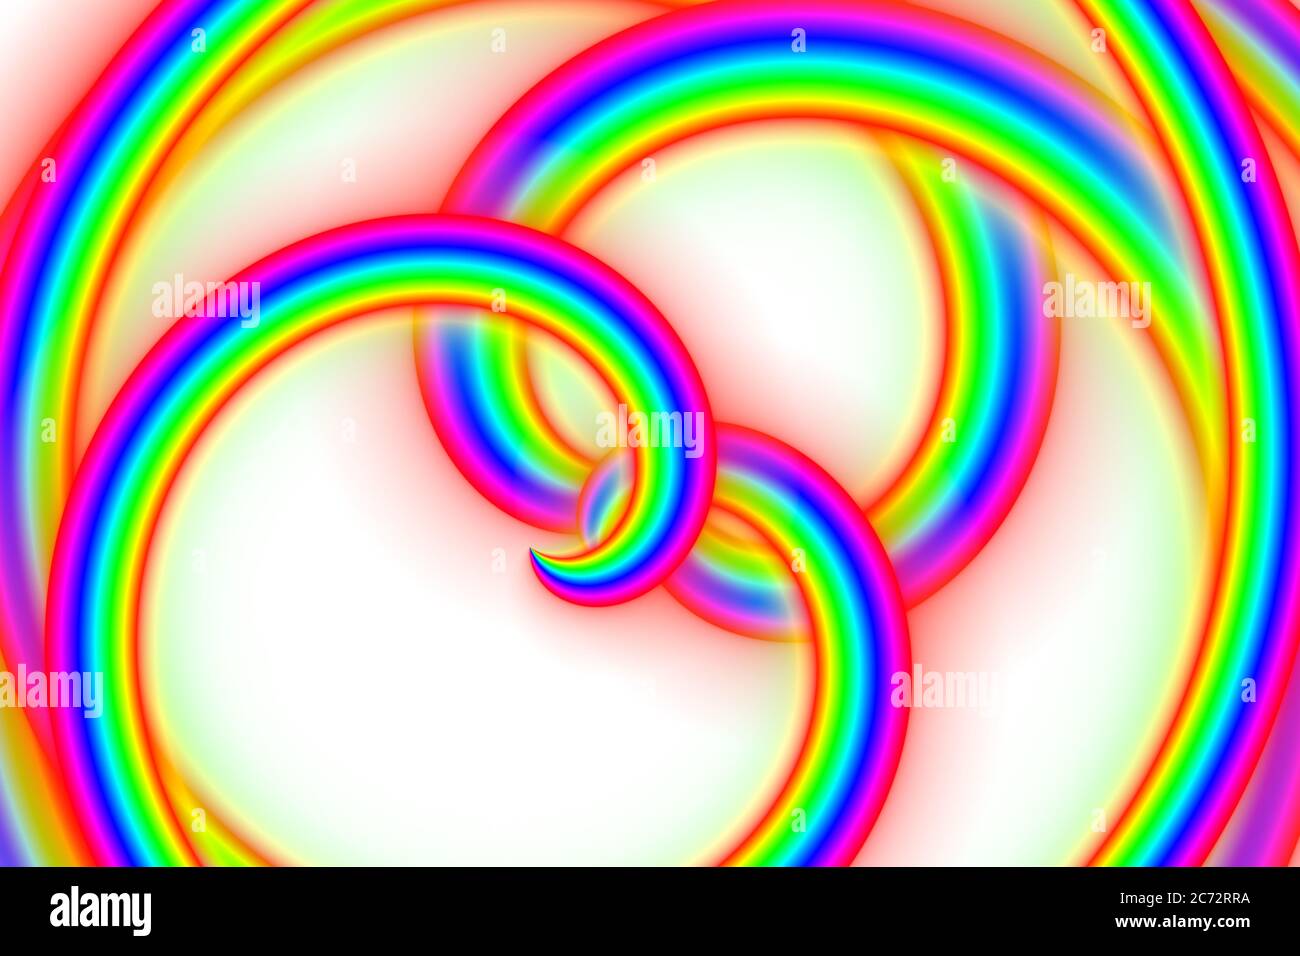 Abstract rainbow LGBT swirls into two heart shapes,  valentines day background Stock Photo